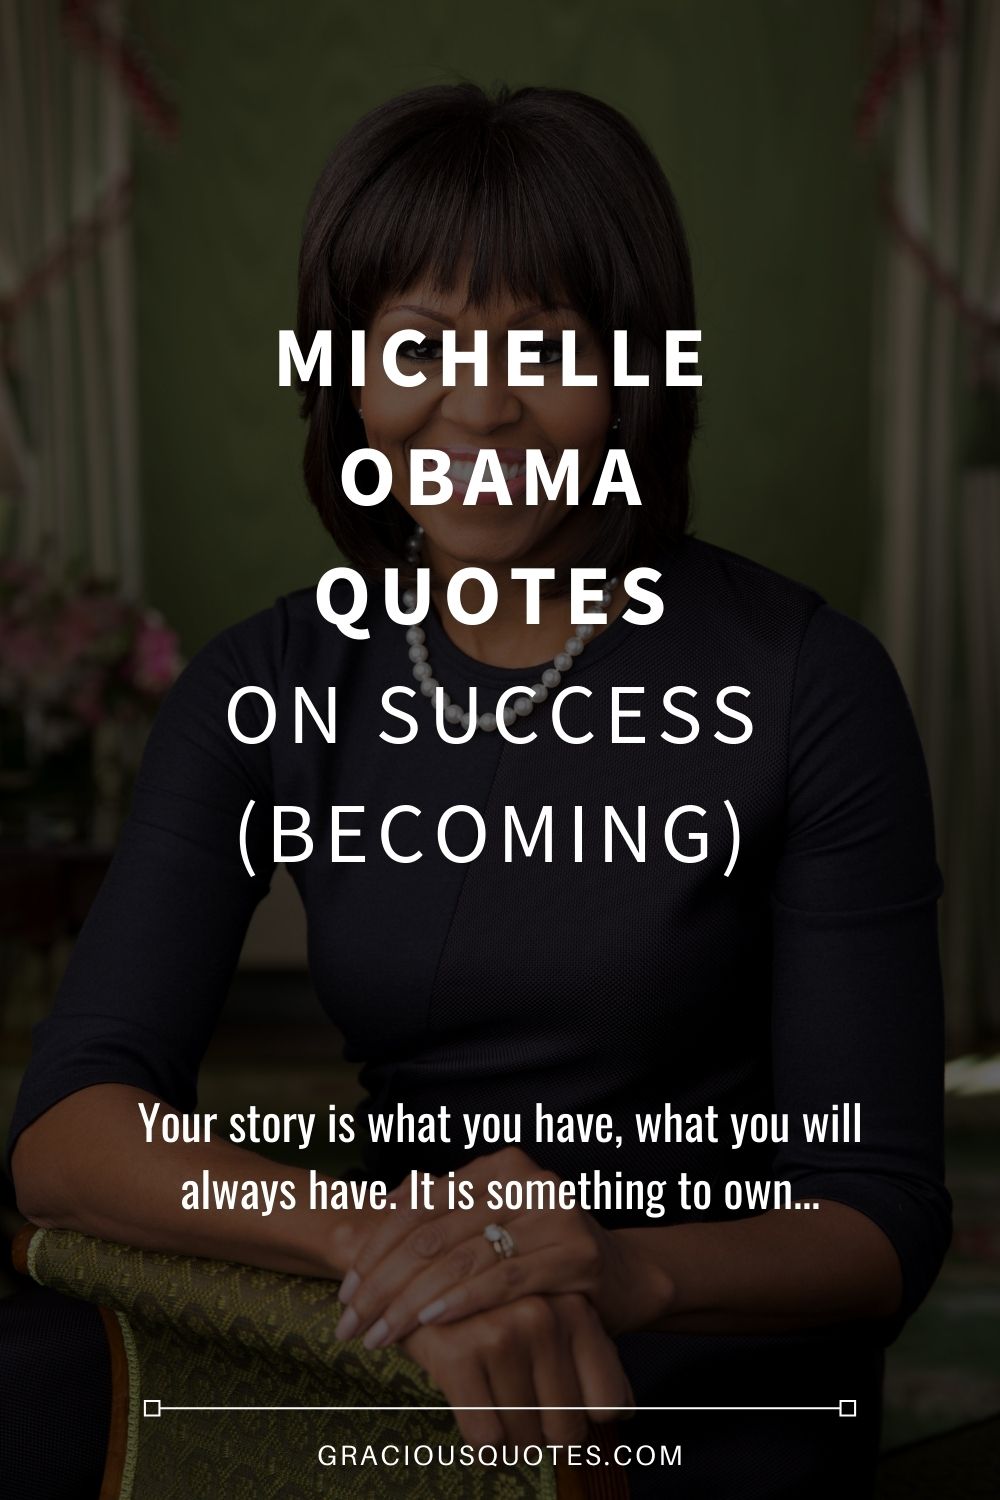 Michelle Obama Quotes on Success (BECOMING) - Gracious Quotes